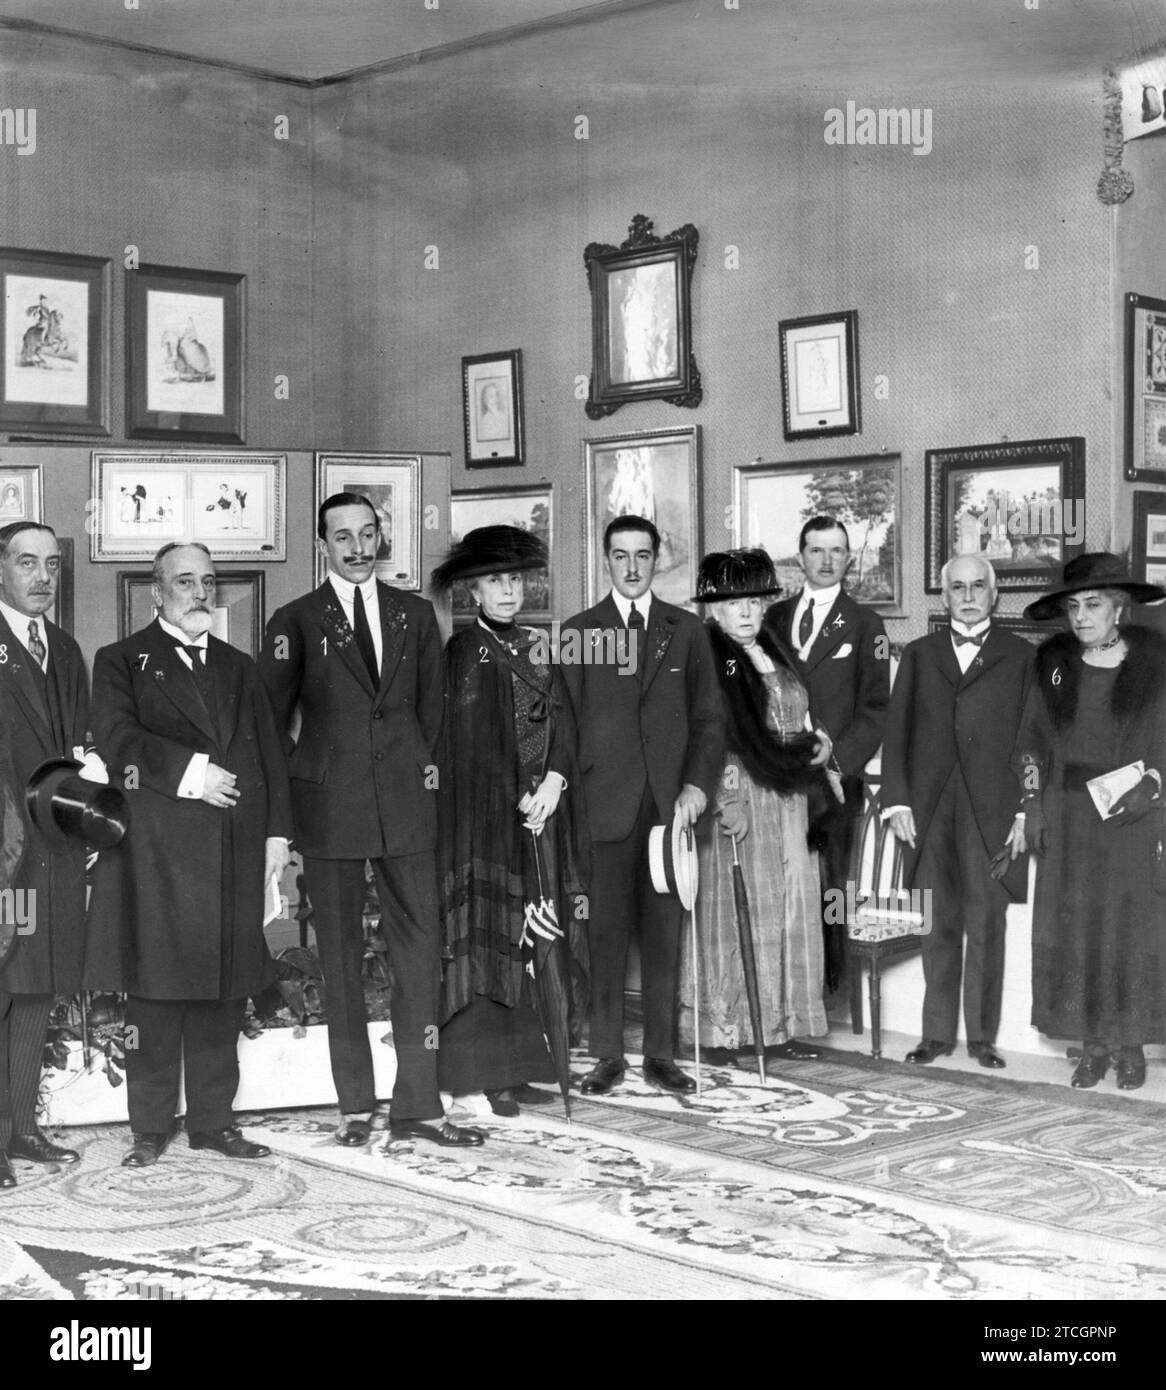 05/25/1922. Madrid. In the Society of Friends of Art. Their Majesties the Kings D. Alfonso Xiii (1) and Mrs. María Cristina (2); Ss.Aa. the Infantes Doña Isabel (3), D. Fernando (4), D. Alfonso (5), the Duchess of Talavera (6); The Minister of Public Instruction (7) and the Director of Fine Arts (8), at the inauguration of the Drawings exhibition, Verified yesterday. Credit: Album / Archivo ABC / Julio Duque Stock Photo